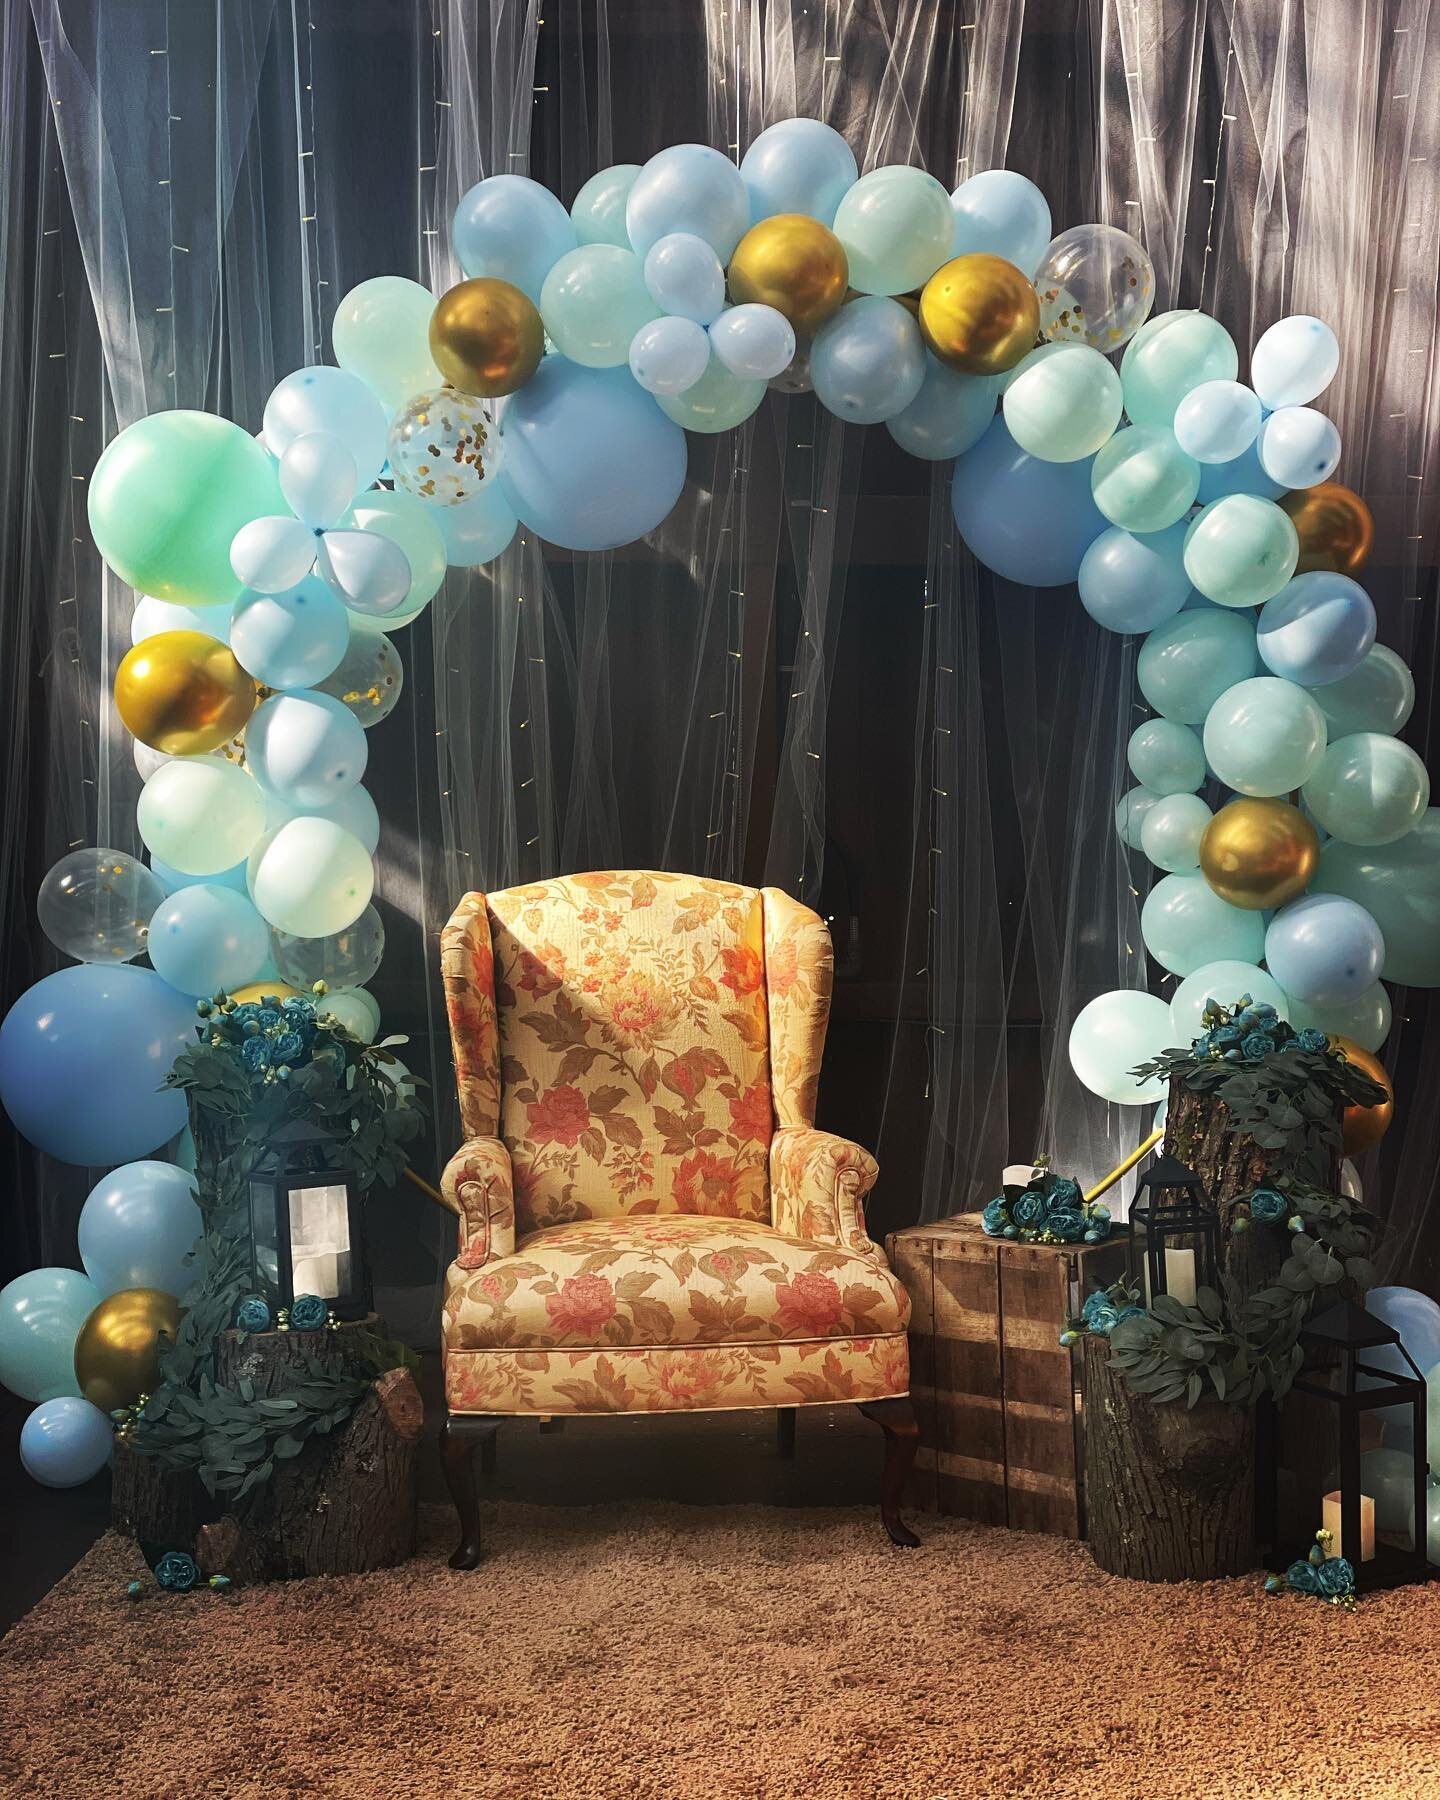 Did you know we make ballon arches?! Ask about custom pricing when you book an event.